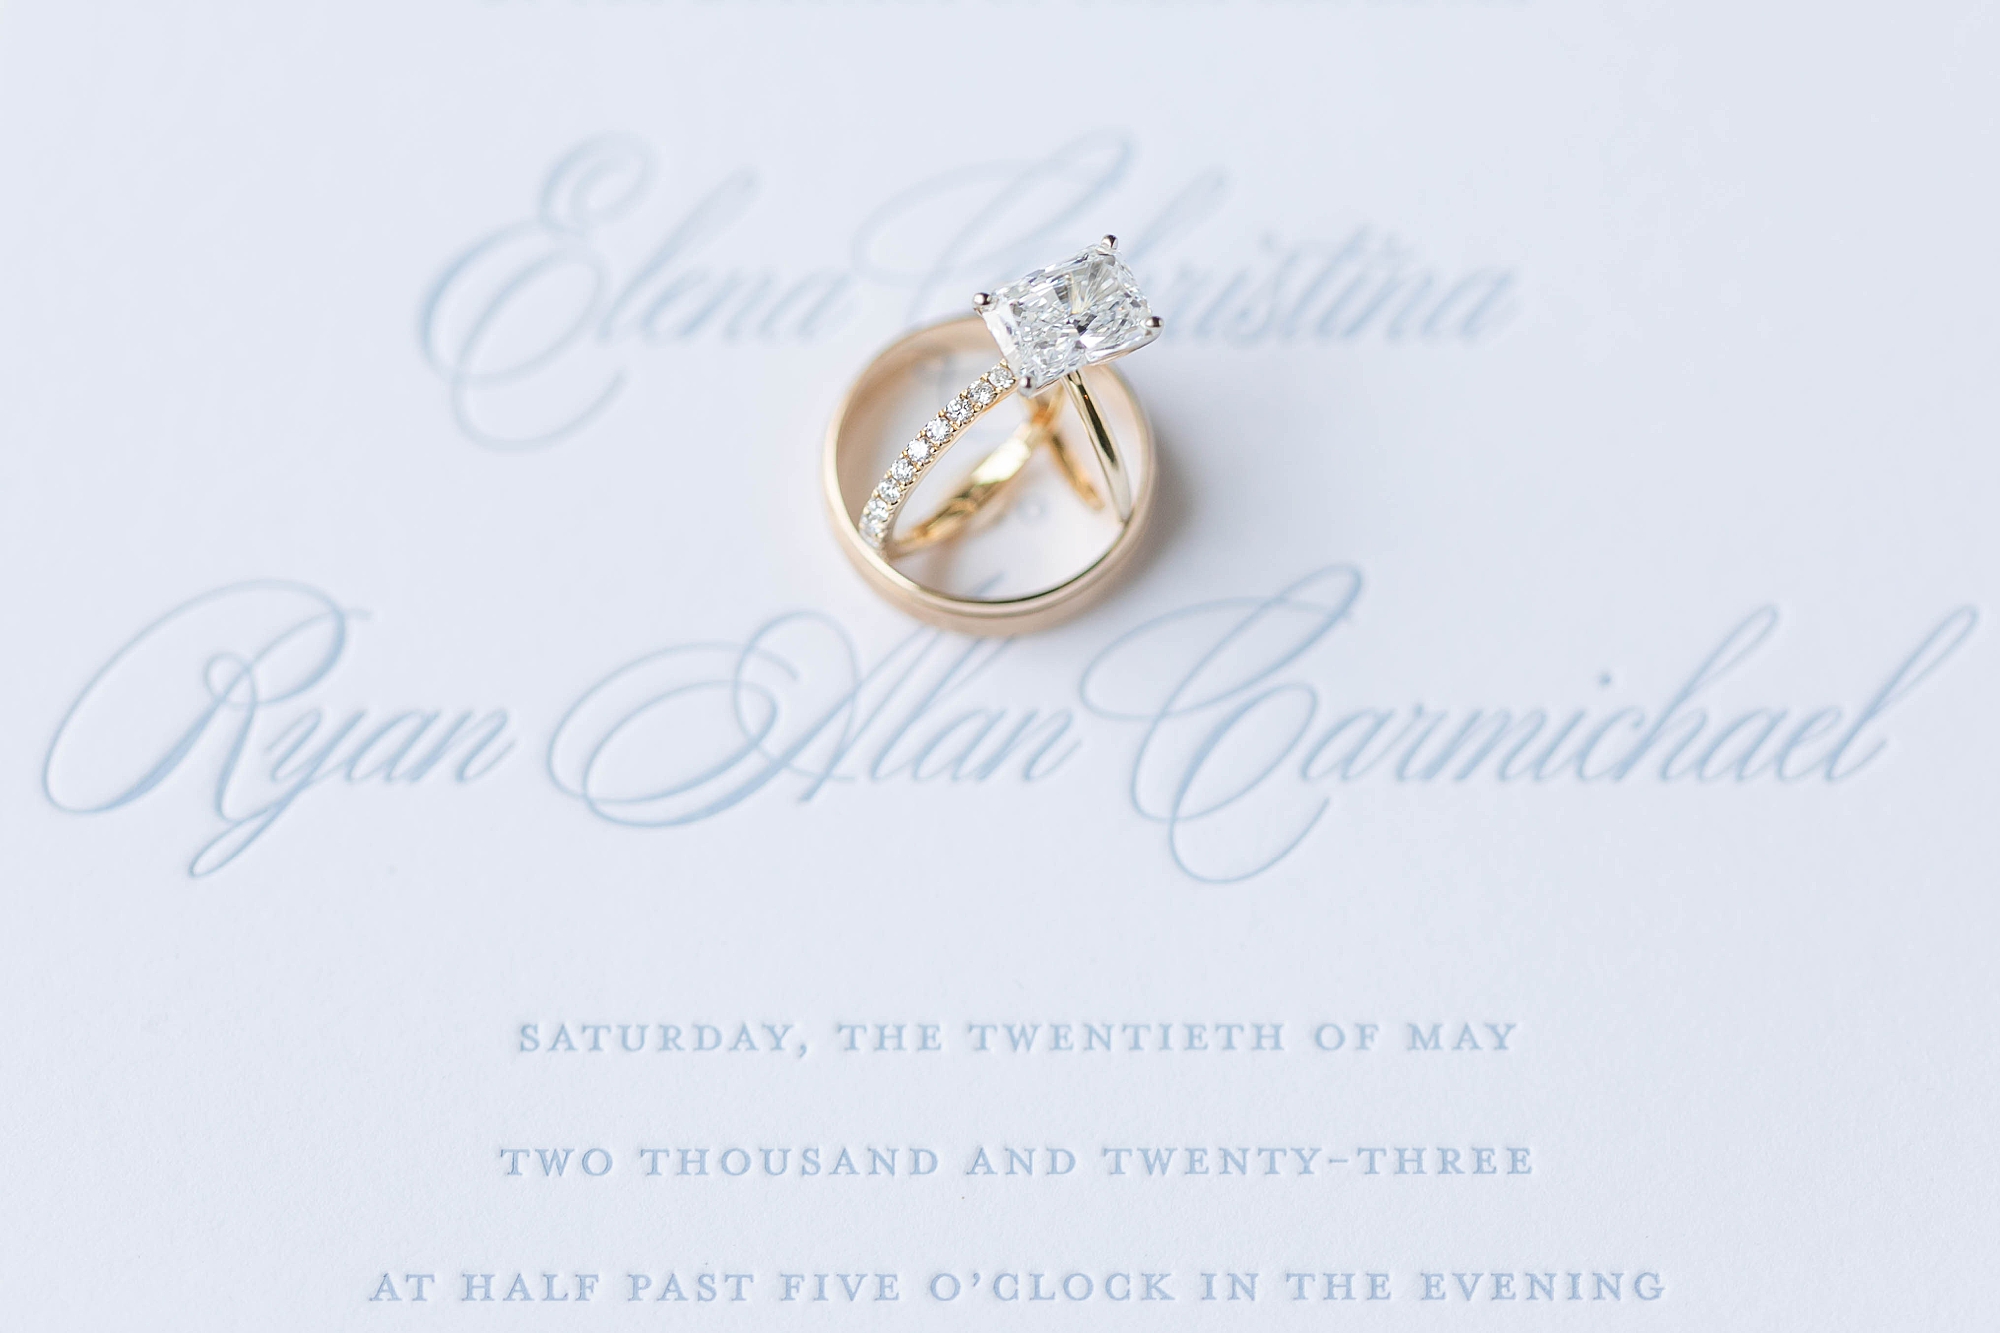 gold wedding rings rest on invitation with blue lettering